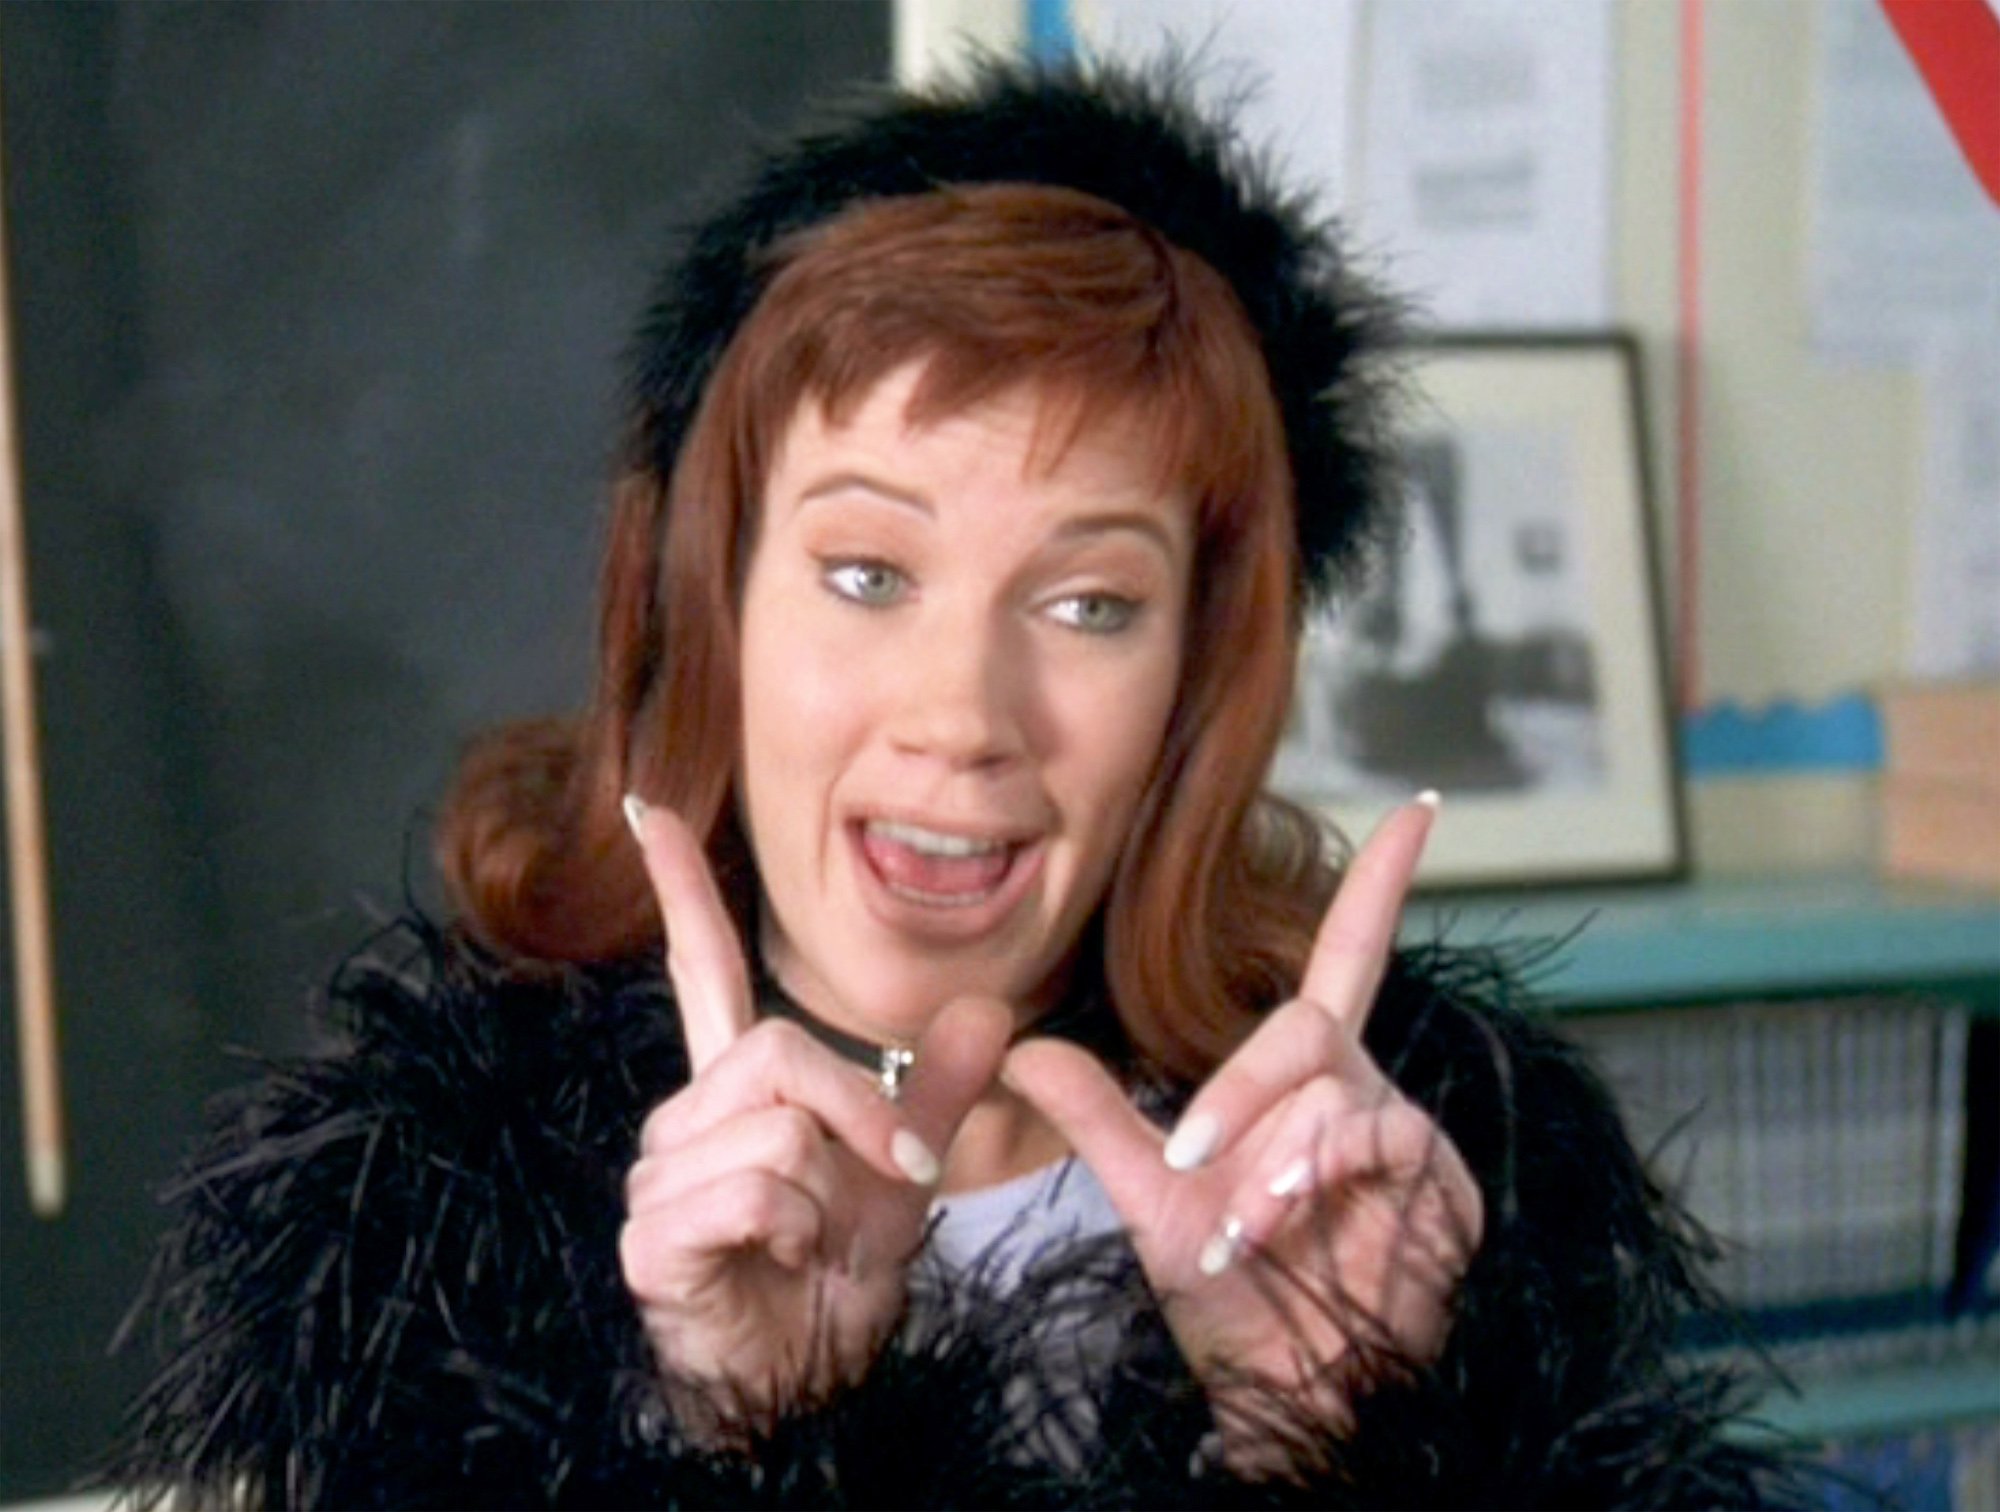 Elisa Donovan as Amber making a 'W' with her hands in 'Clueless'